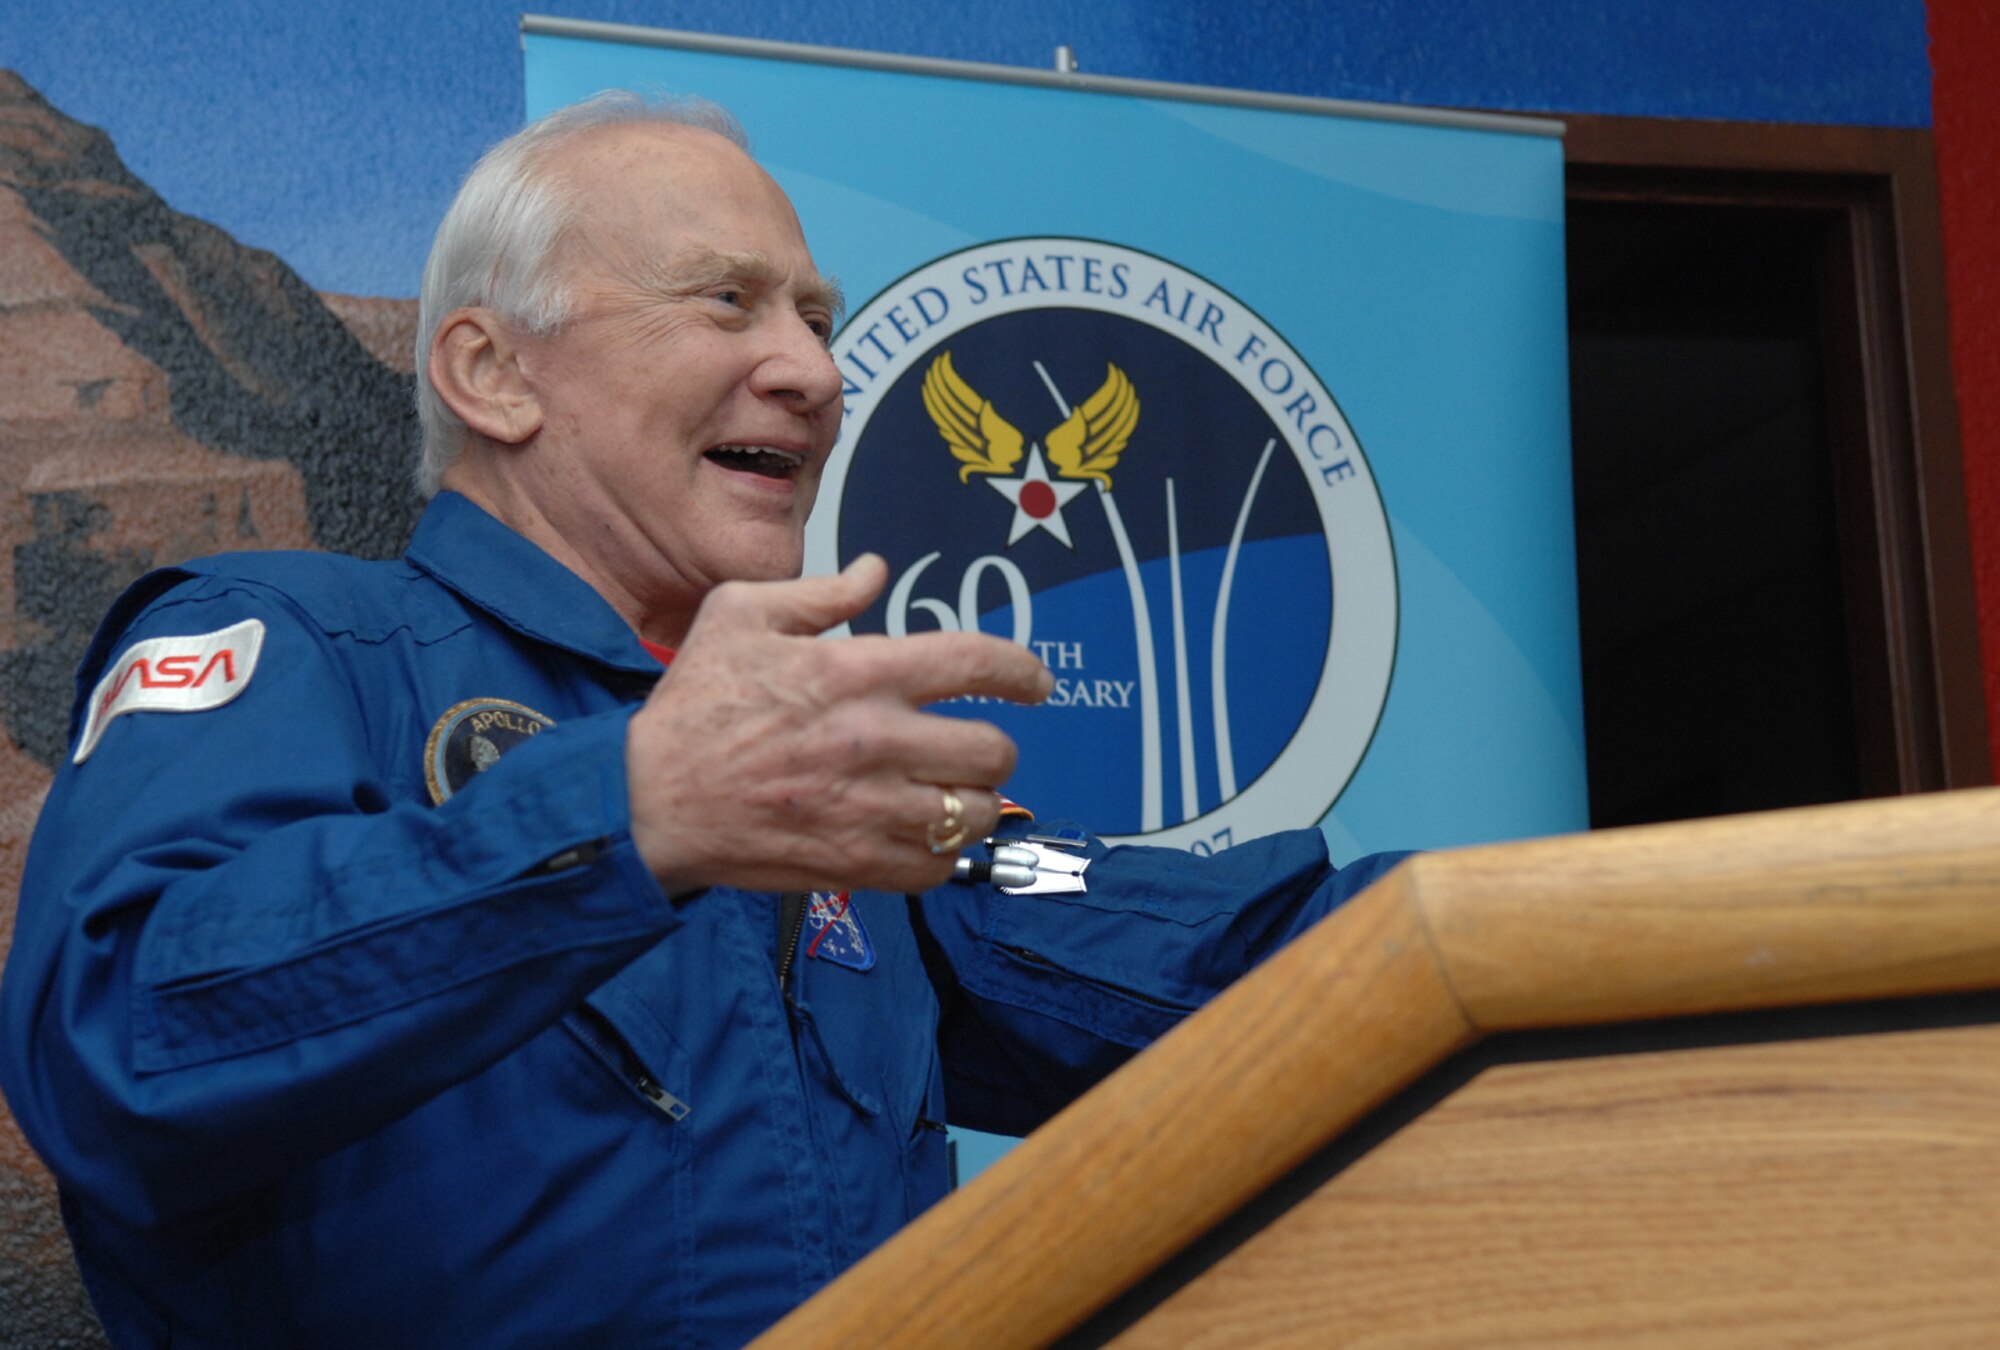 Retired Air Force colonel and former NASA astronaut Buzz Aldrin, recounts his aviation experiences to commemorate the Air Force’s 60th anniversary during a press conference at the Nellis AFB 2007 air show, Nov. 9. (U.S. Air Force photo by Senior Airman Larry E. Reid Jr.)